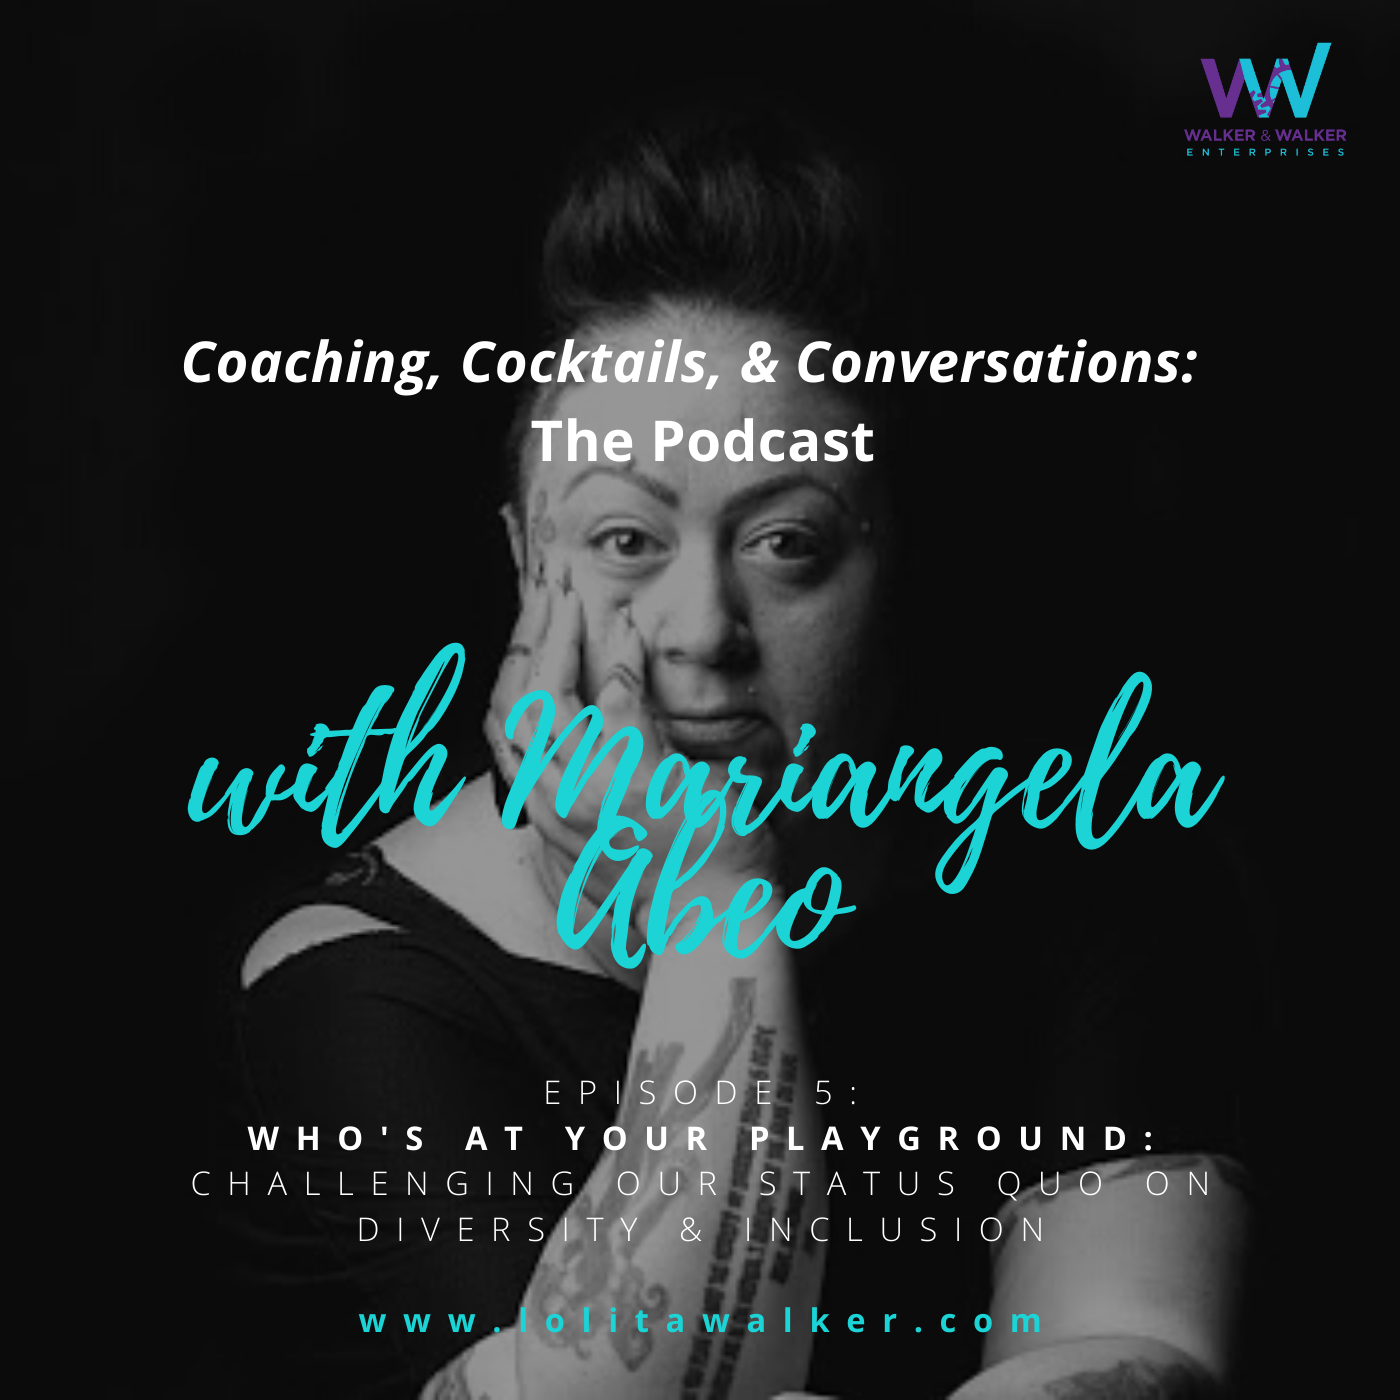 S1E5 - Who&#39;s At Your Playground?  Challenging Our Status Quo (with Mariangela Abeo)